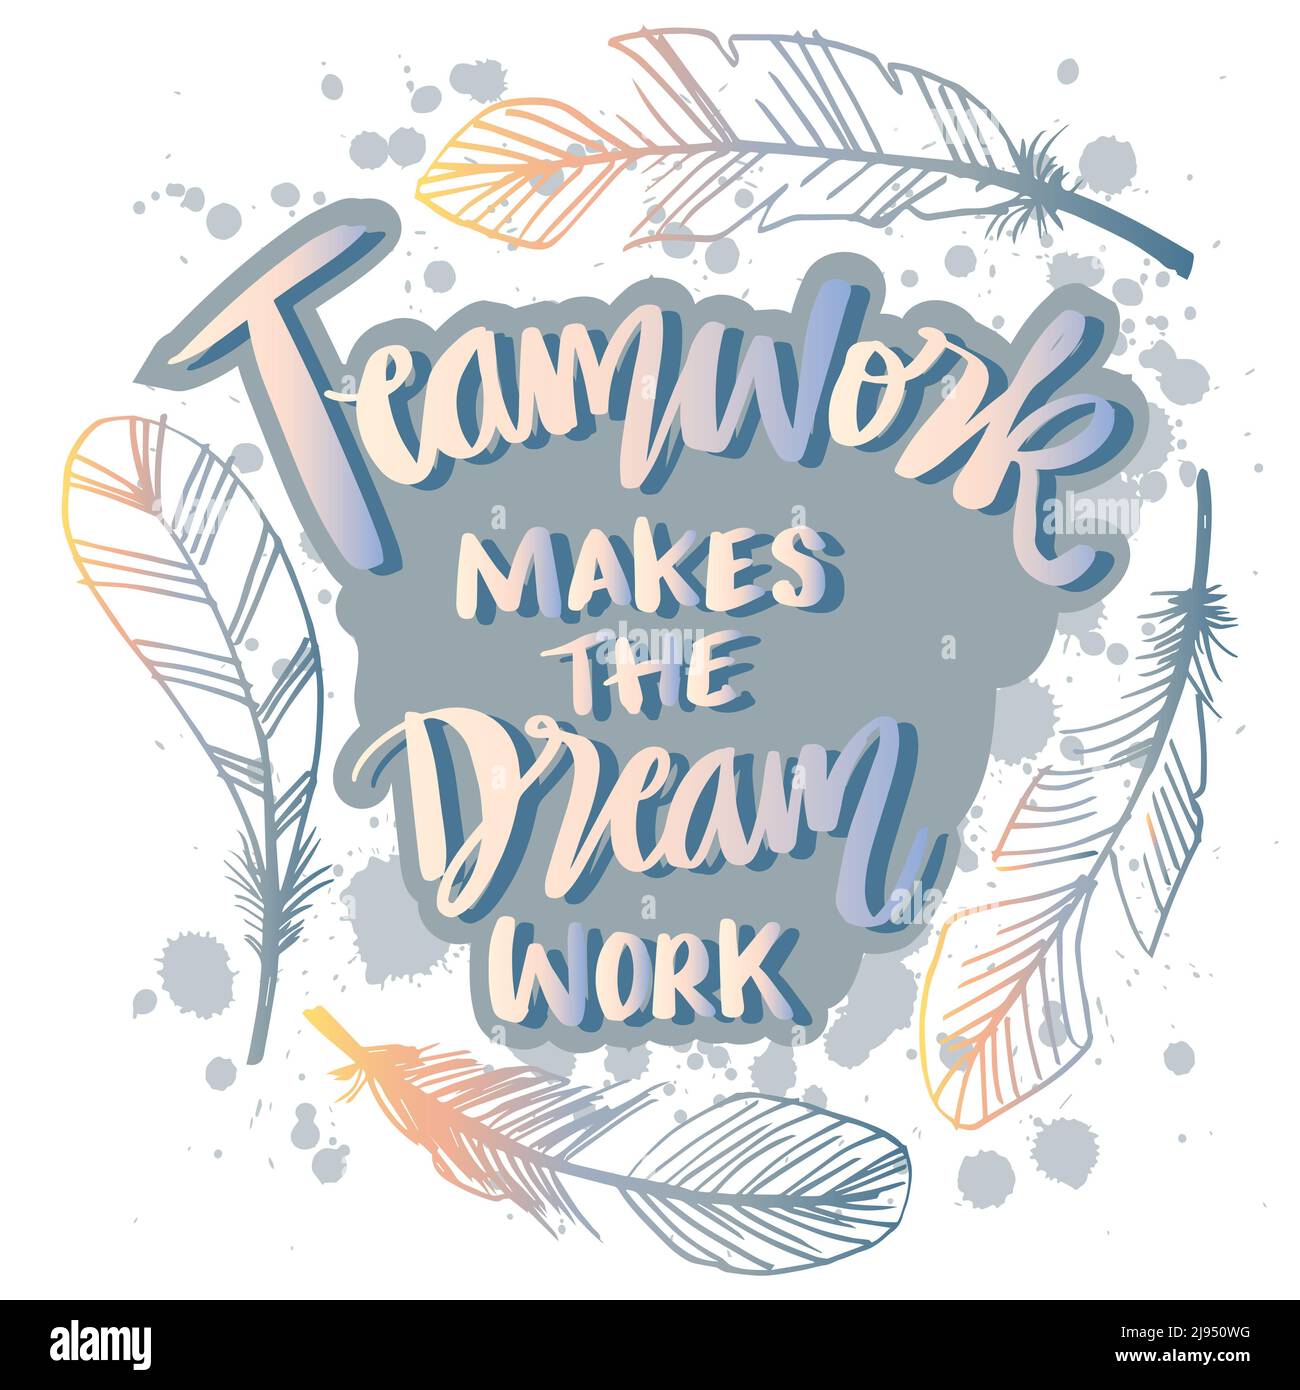 Teamwork makes the dream work. Poster quotes. Stock Photo